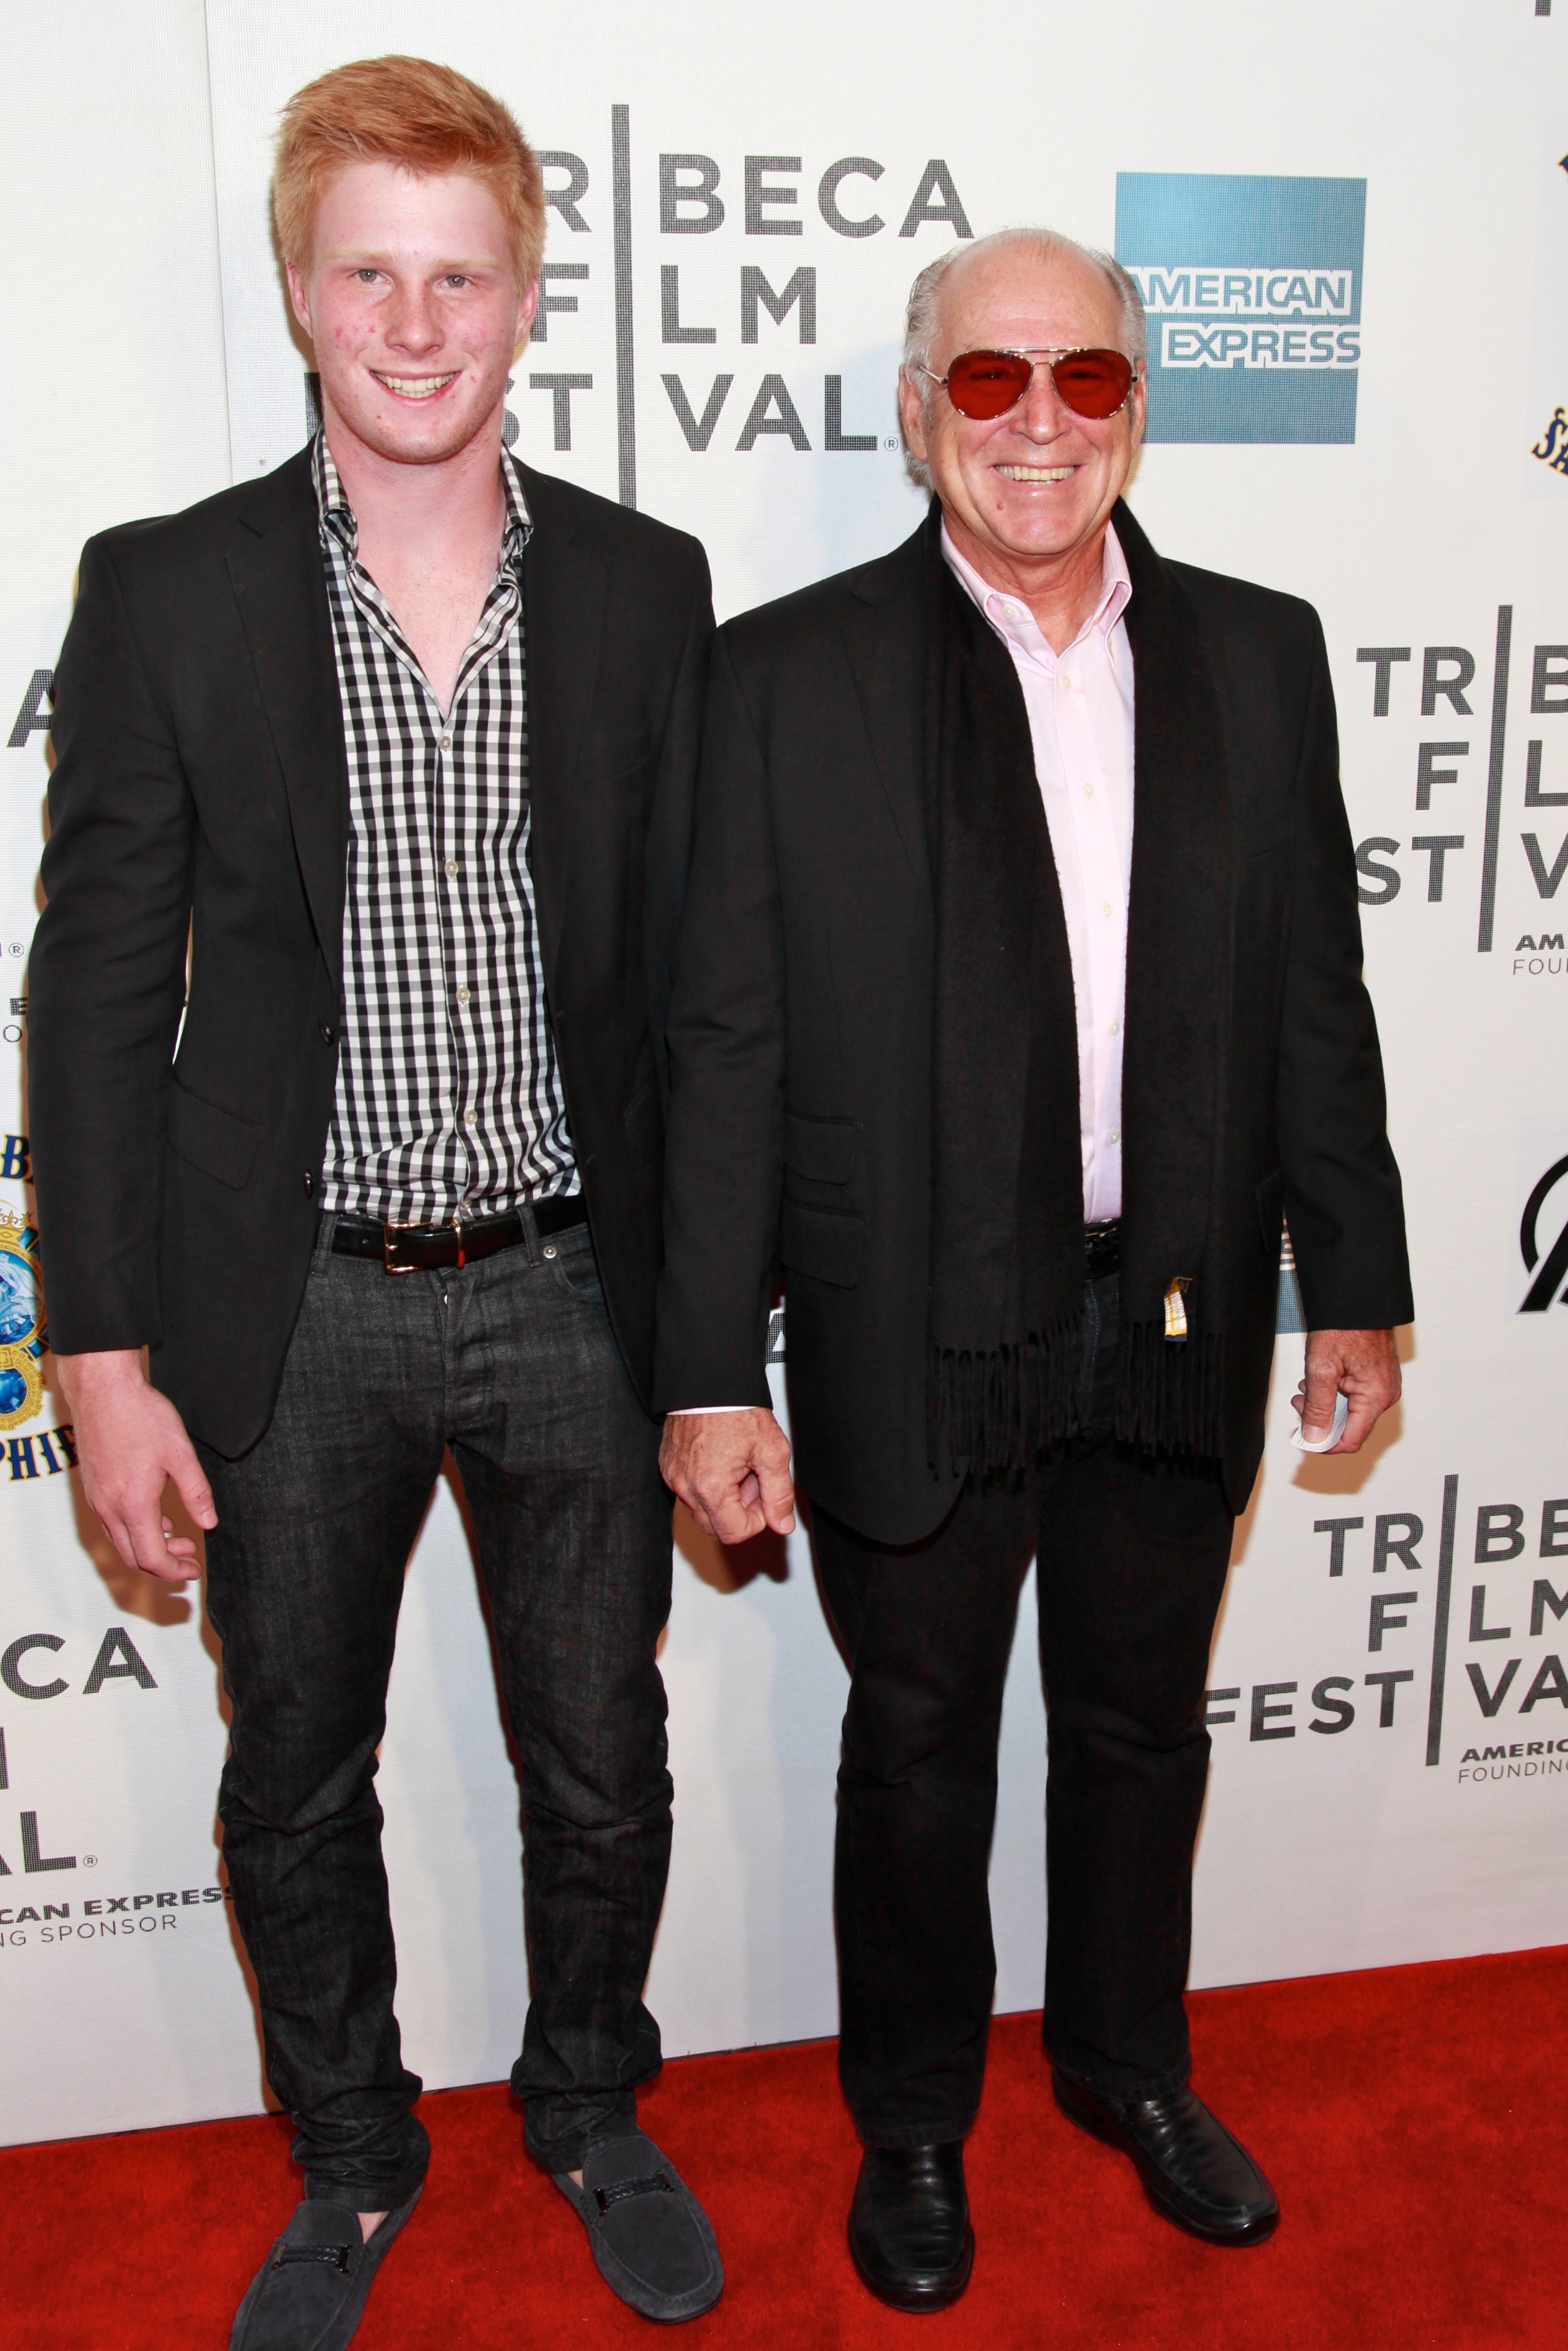 Cameron Marley Buffett and Jimmy Buffett attend "The Avengers" Premiere, Closing Night Of The Tribeca Film Festival Sponsored By Bombay Sapphire on April 28, 2012 in New York City. | Source: Getty Images